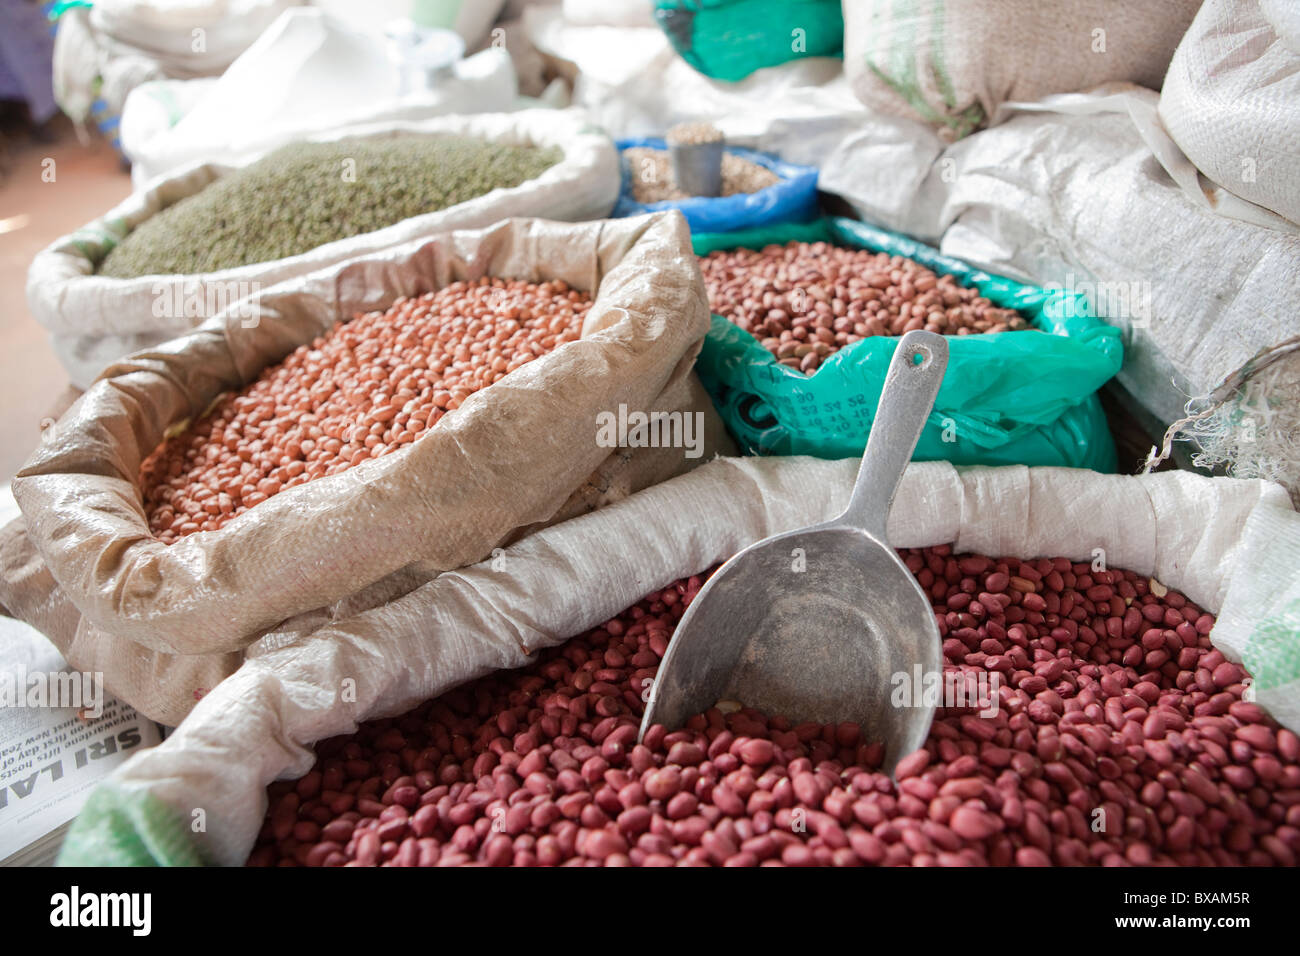 Nuts, legumes and peas are for sale in Iganga's central market - Iganga, Uganda, East Africa. Stock Photo